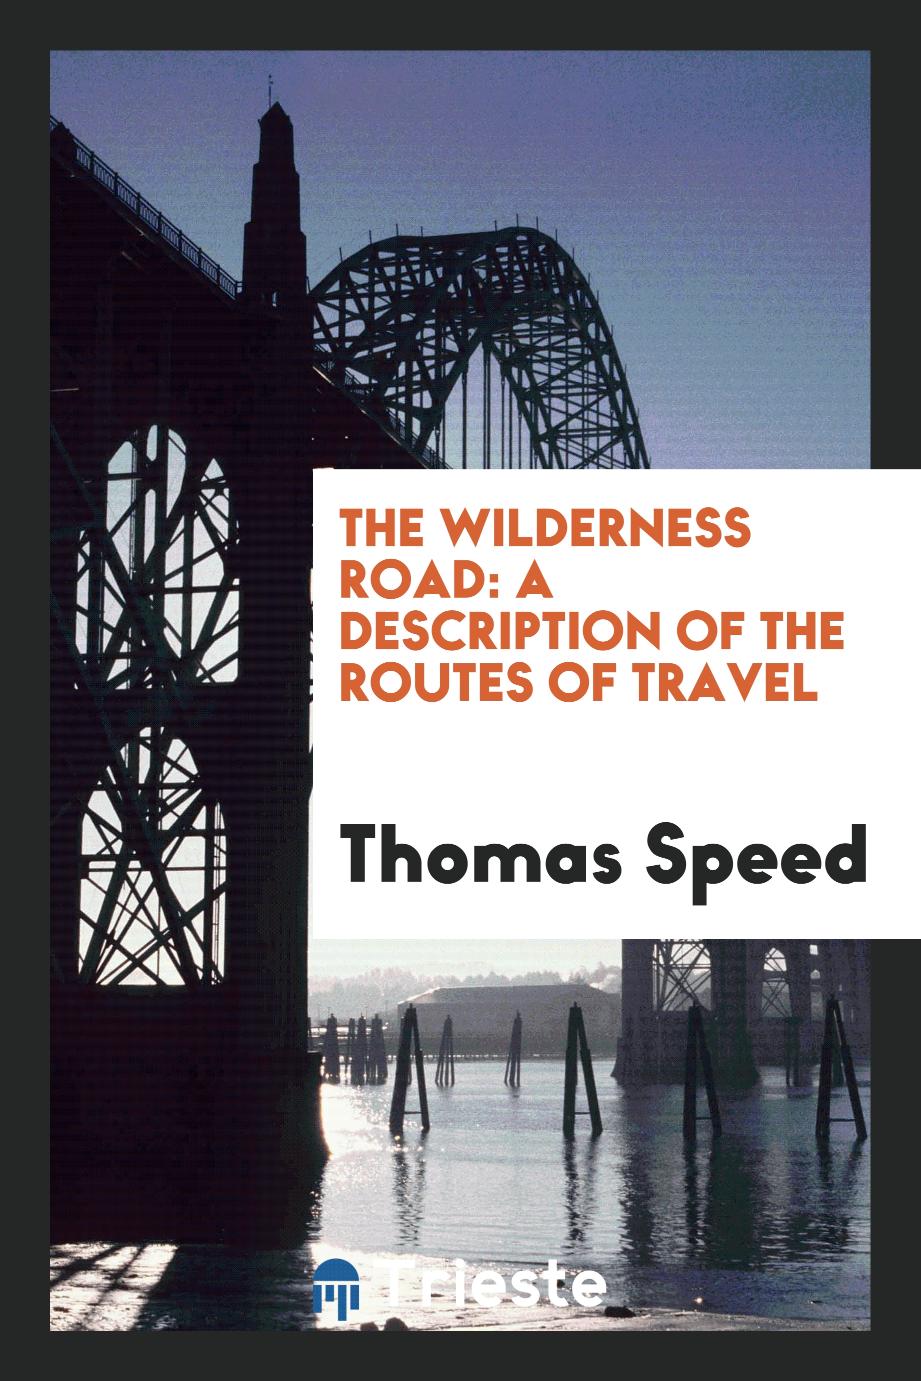 The Wilderness Road: A Description of the Routes of Travel